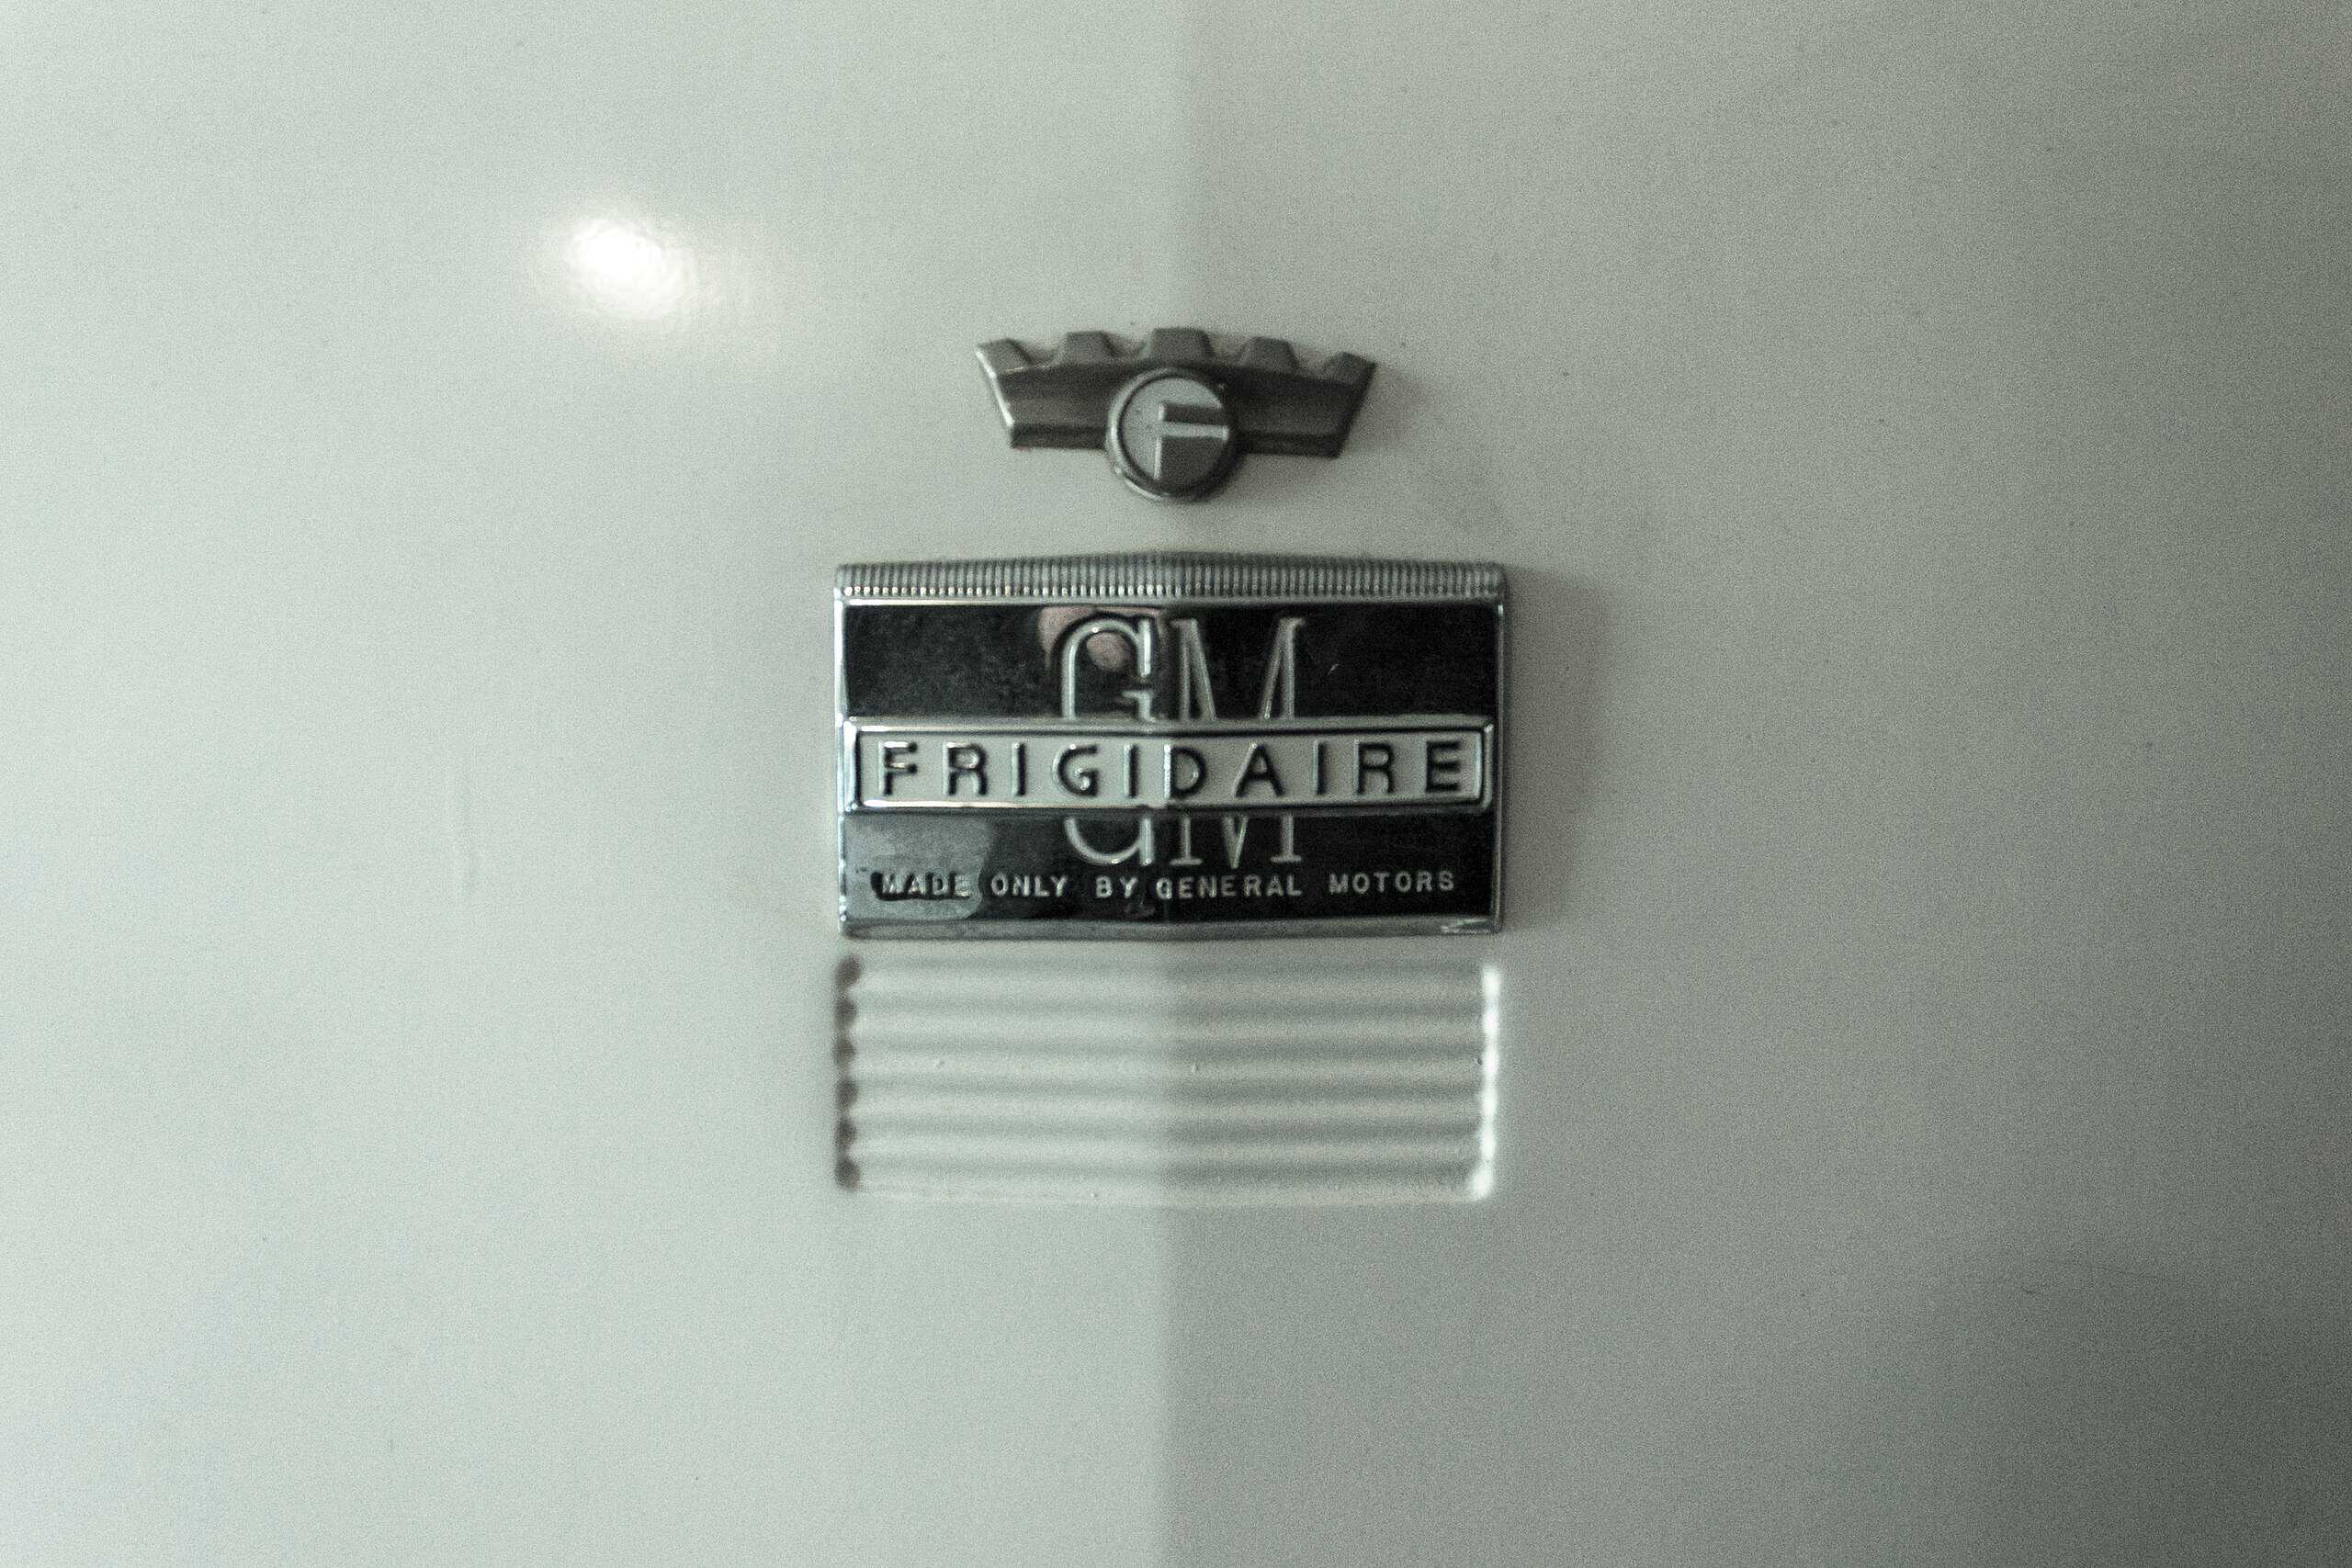 Old Frigidaire name badge by Paolo Trabattoni from Saronno